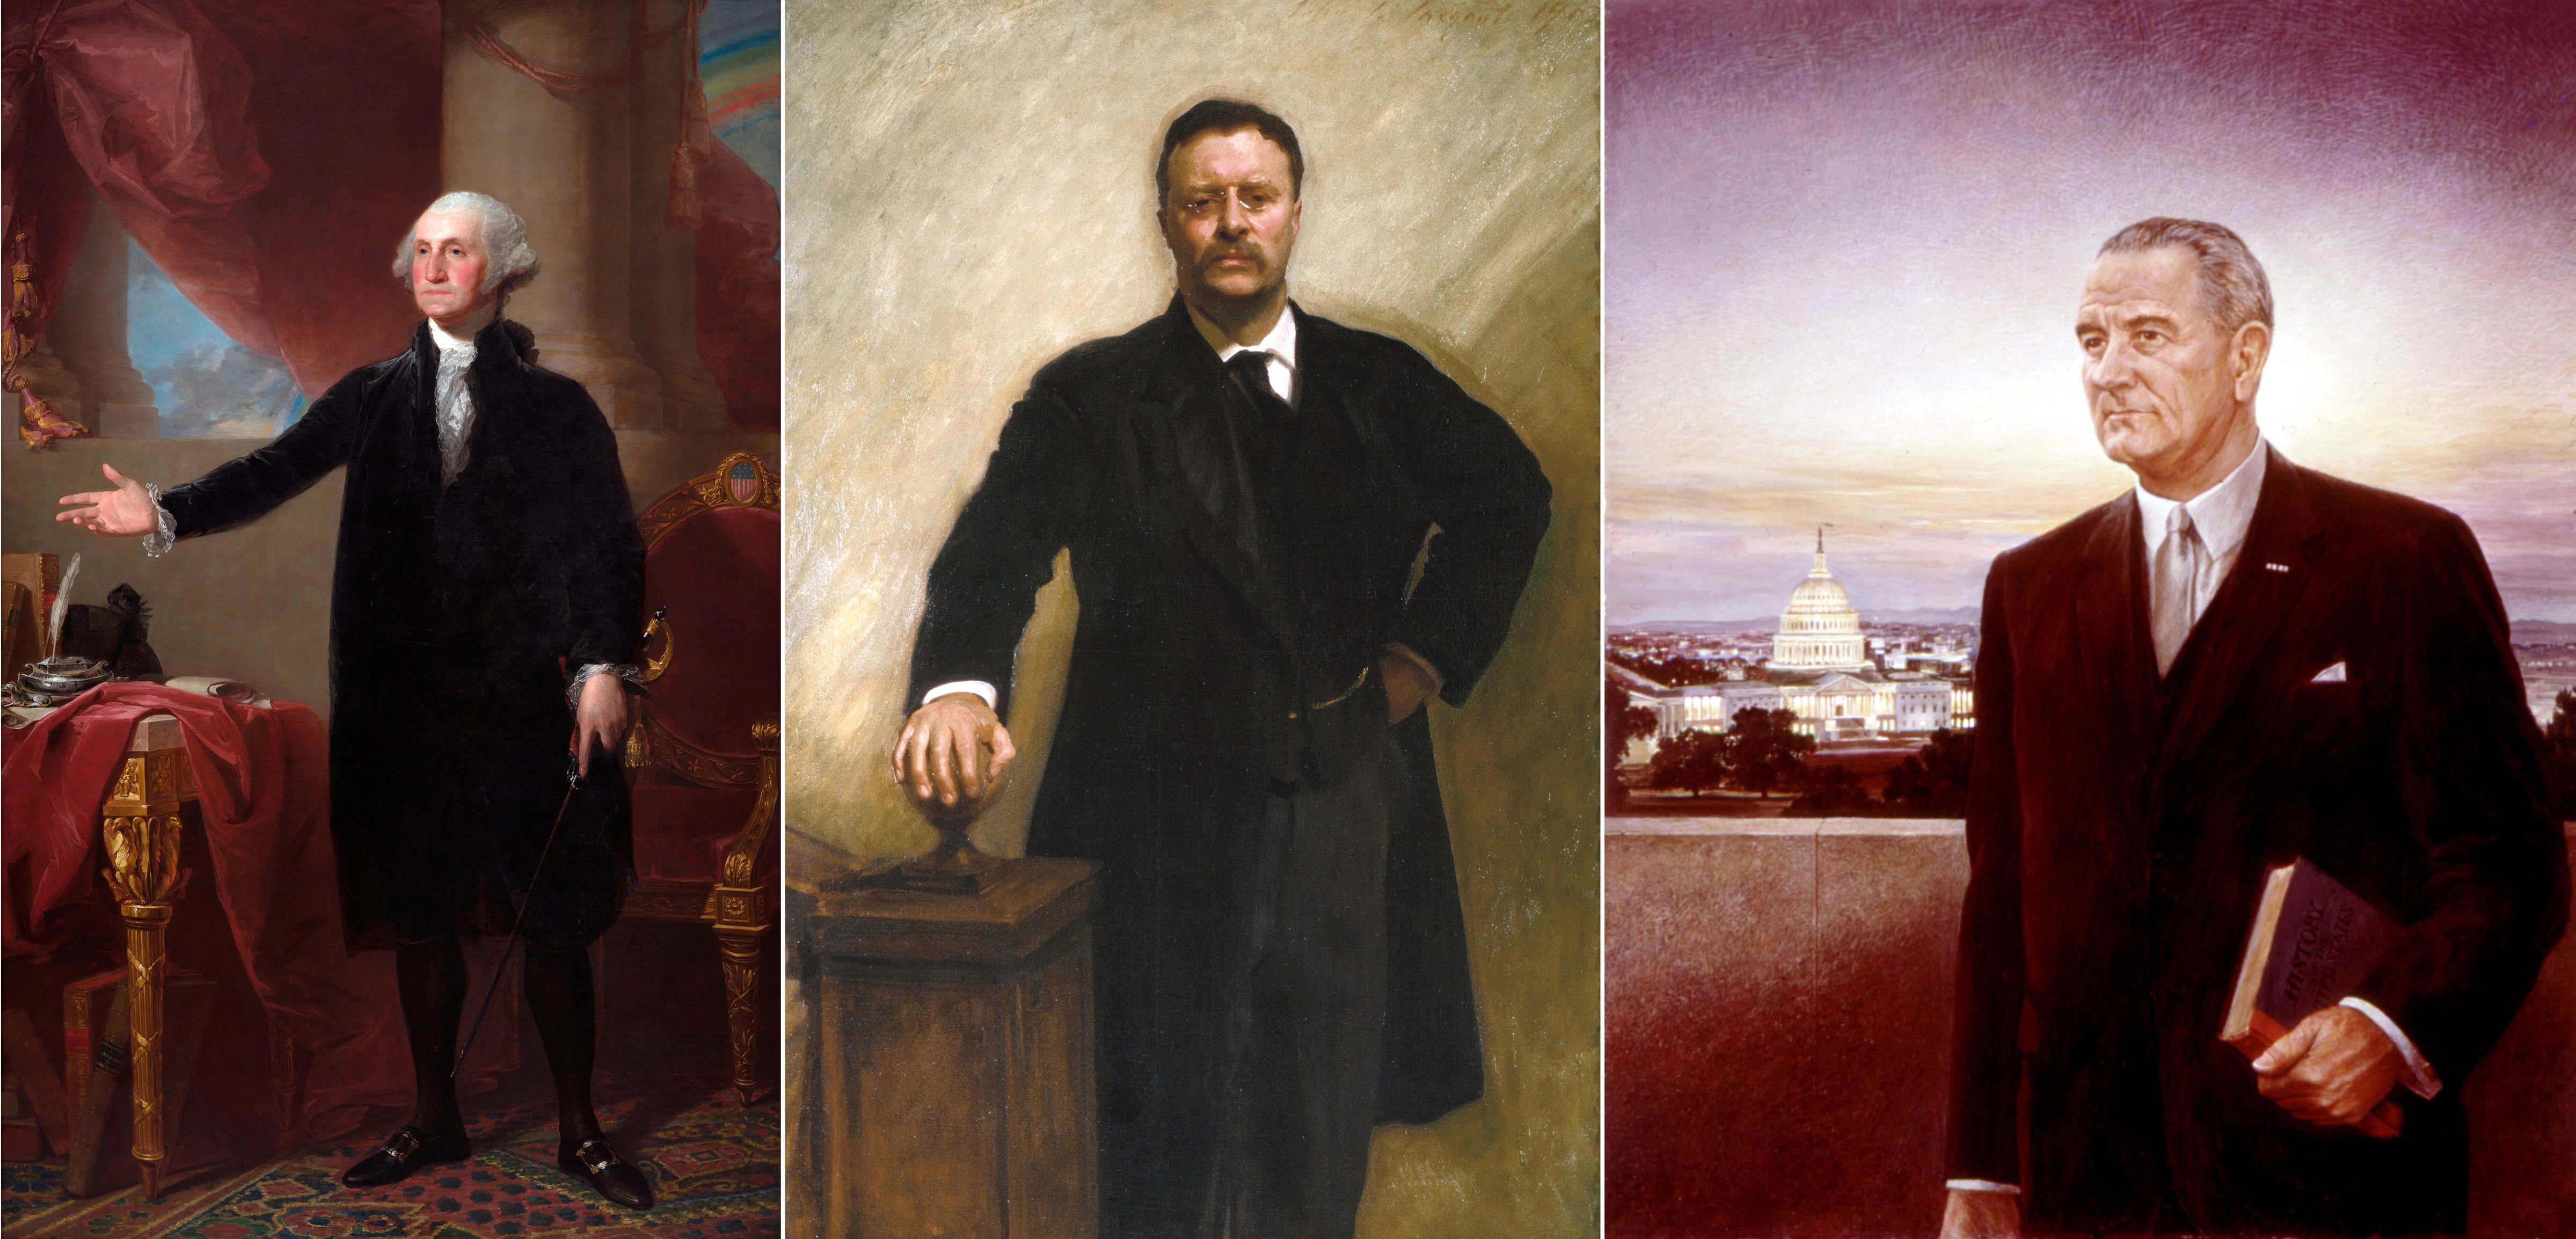 L-R: George Washington (The Lansdowne Portrait) by Gilbert Stuart; President Theodore Roosevelt by John Singer Sargent; Portrait of Lyndon B. Johnson by Peter Hurd (L-R: Corbis Historical/Getty Images; Corbis Historical/Getty Images; Universal Images Group Editorial/Getty Images)